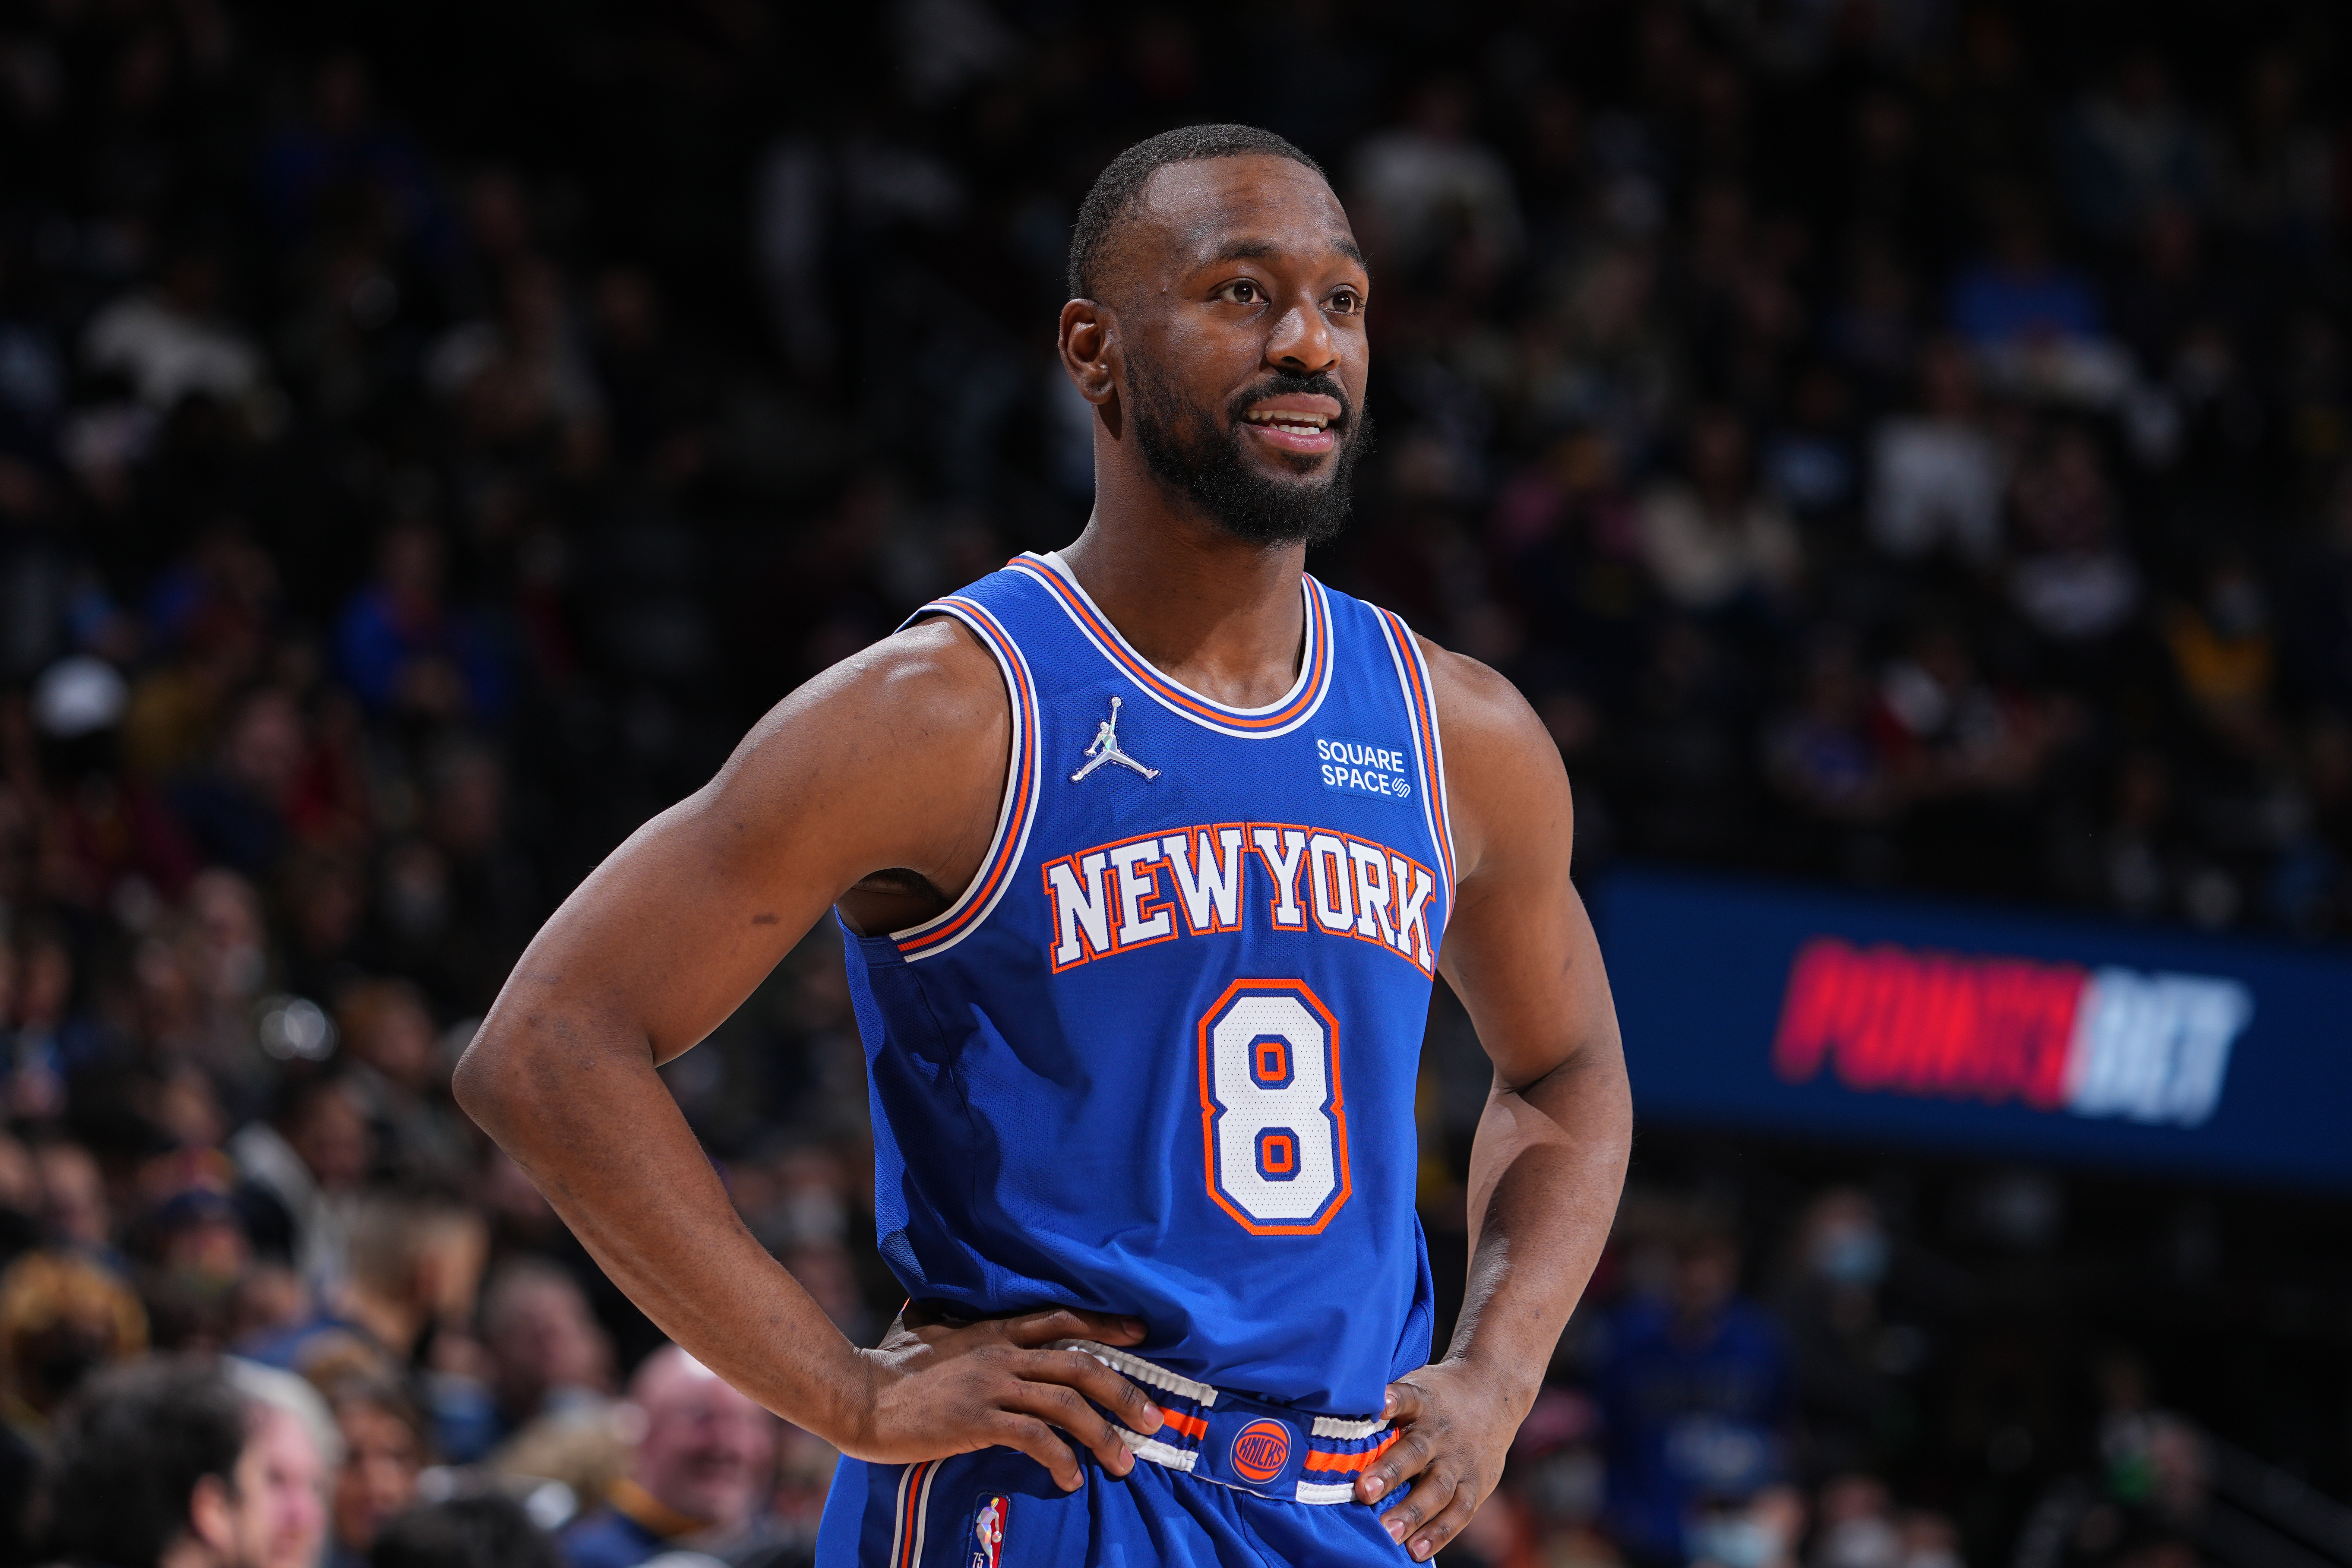 Milan reportedly finalizing deal with Kemba Walker / News 